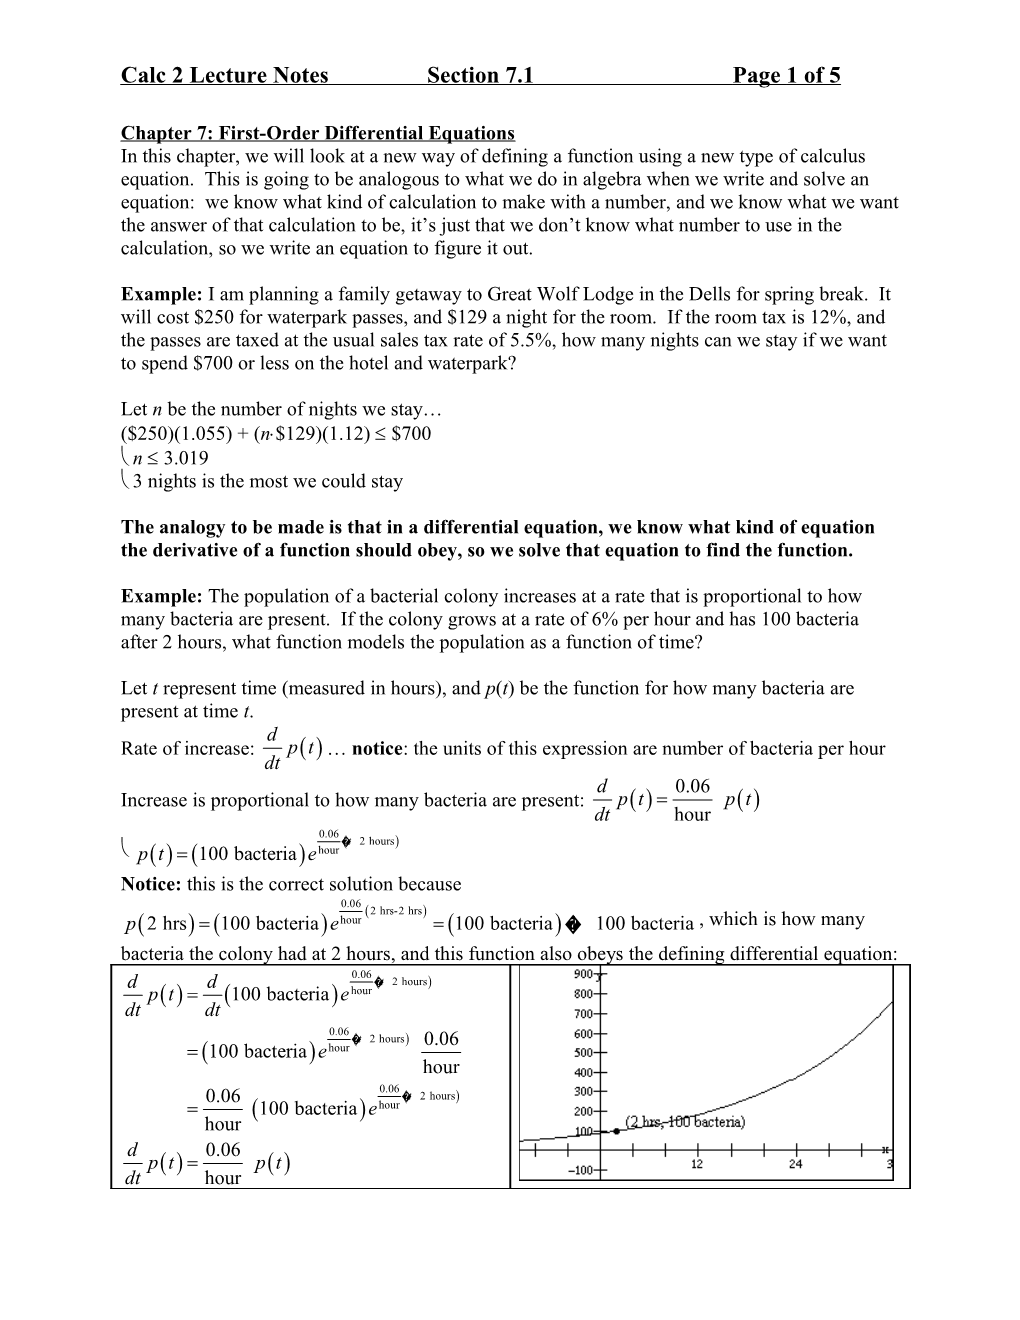 Calculus 2 Lecture Notes, Section 7.1